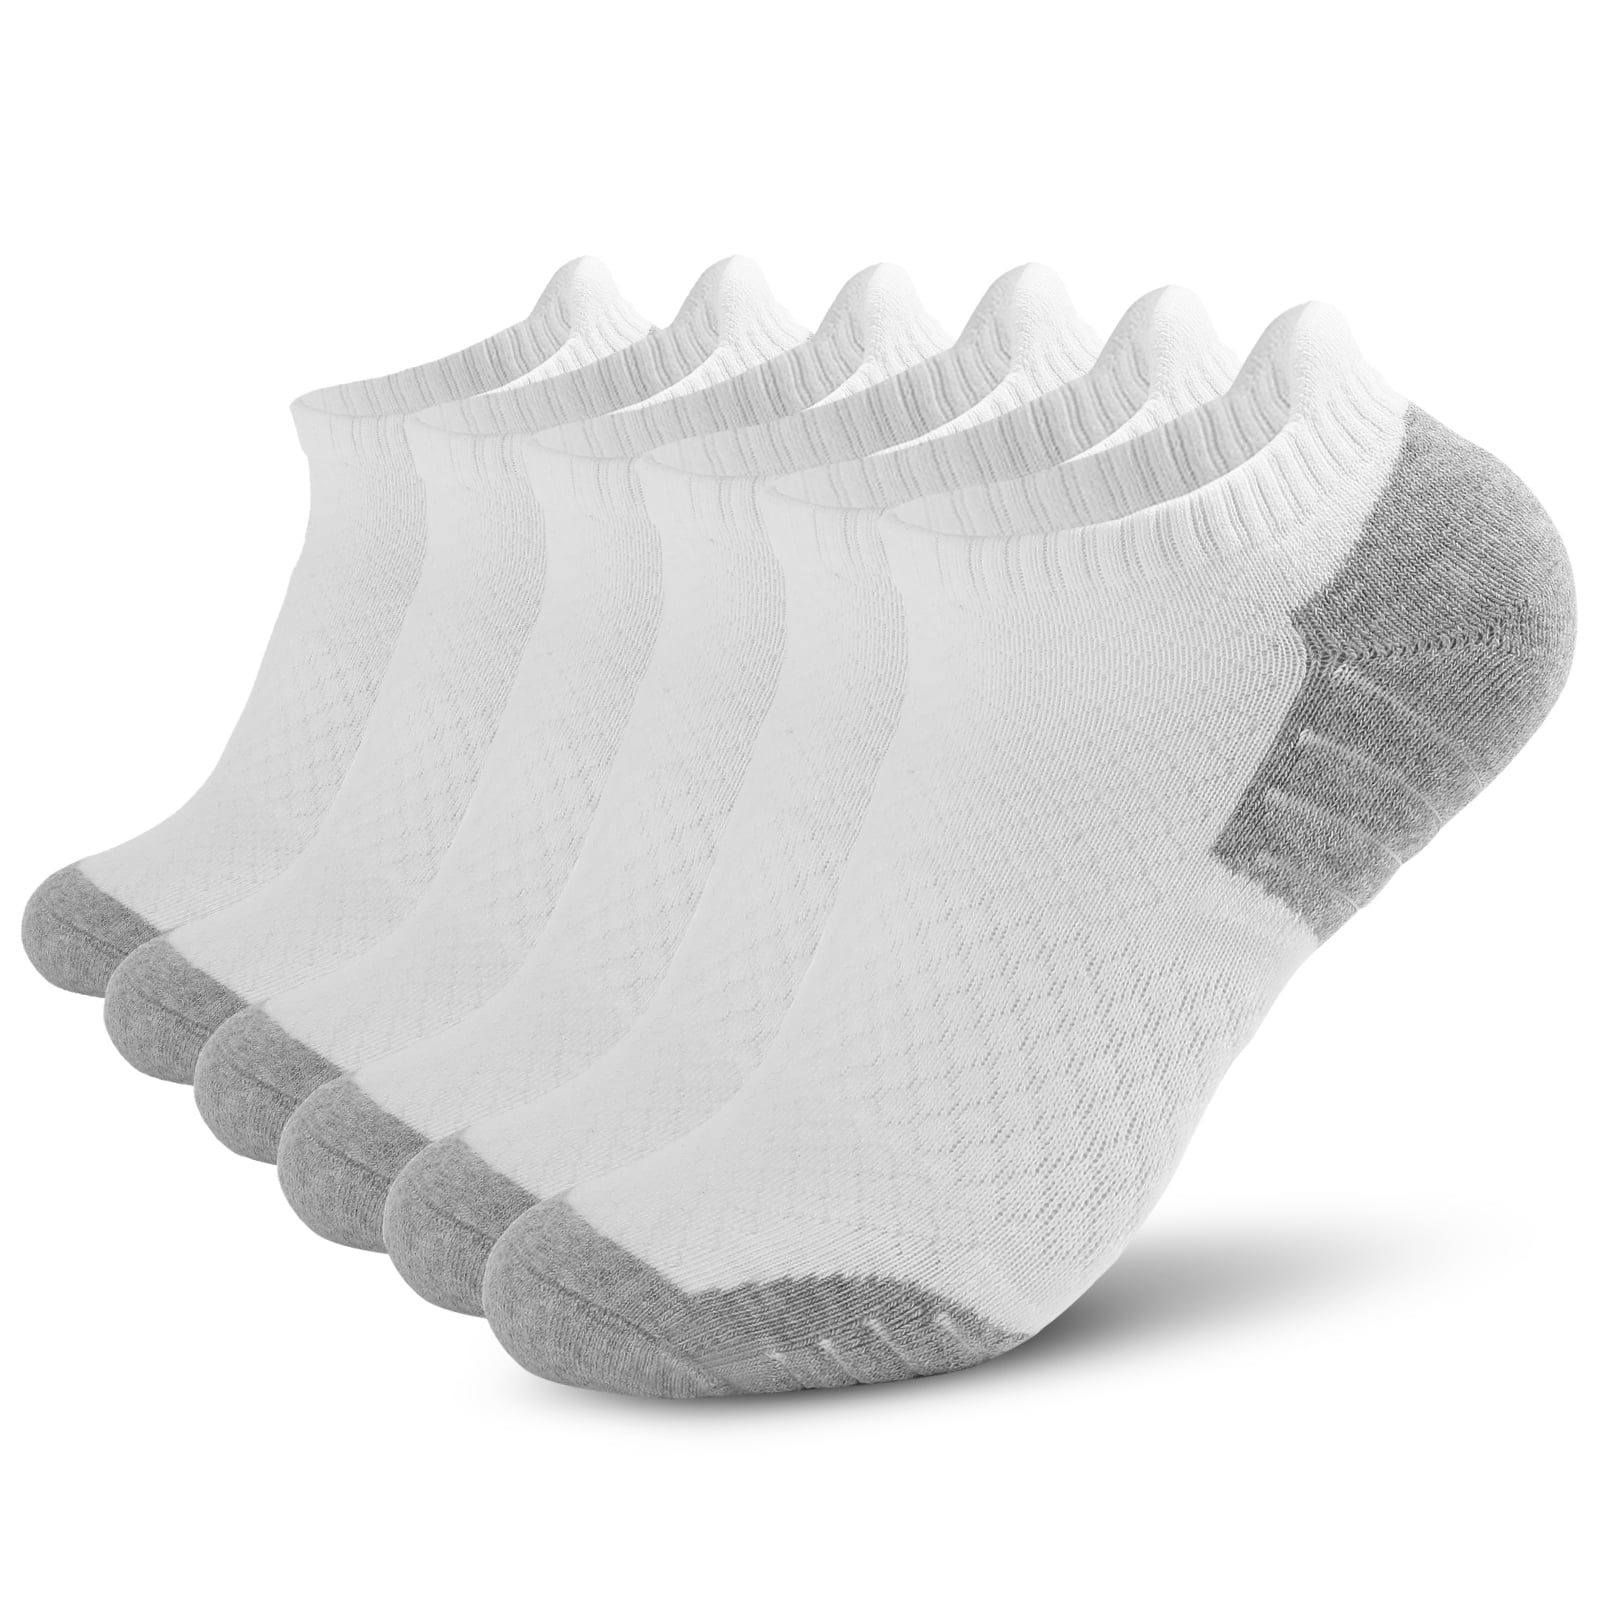 Mens 6 Pairs Multipack Sports Trainer Socks Ankle Low Rise Gym White Cushioned